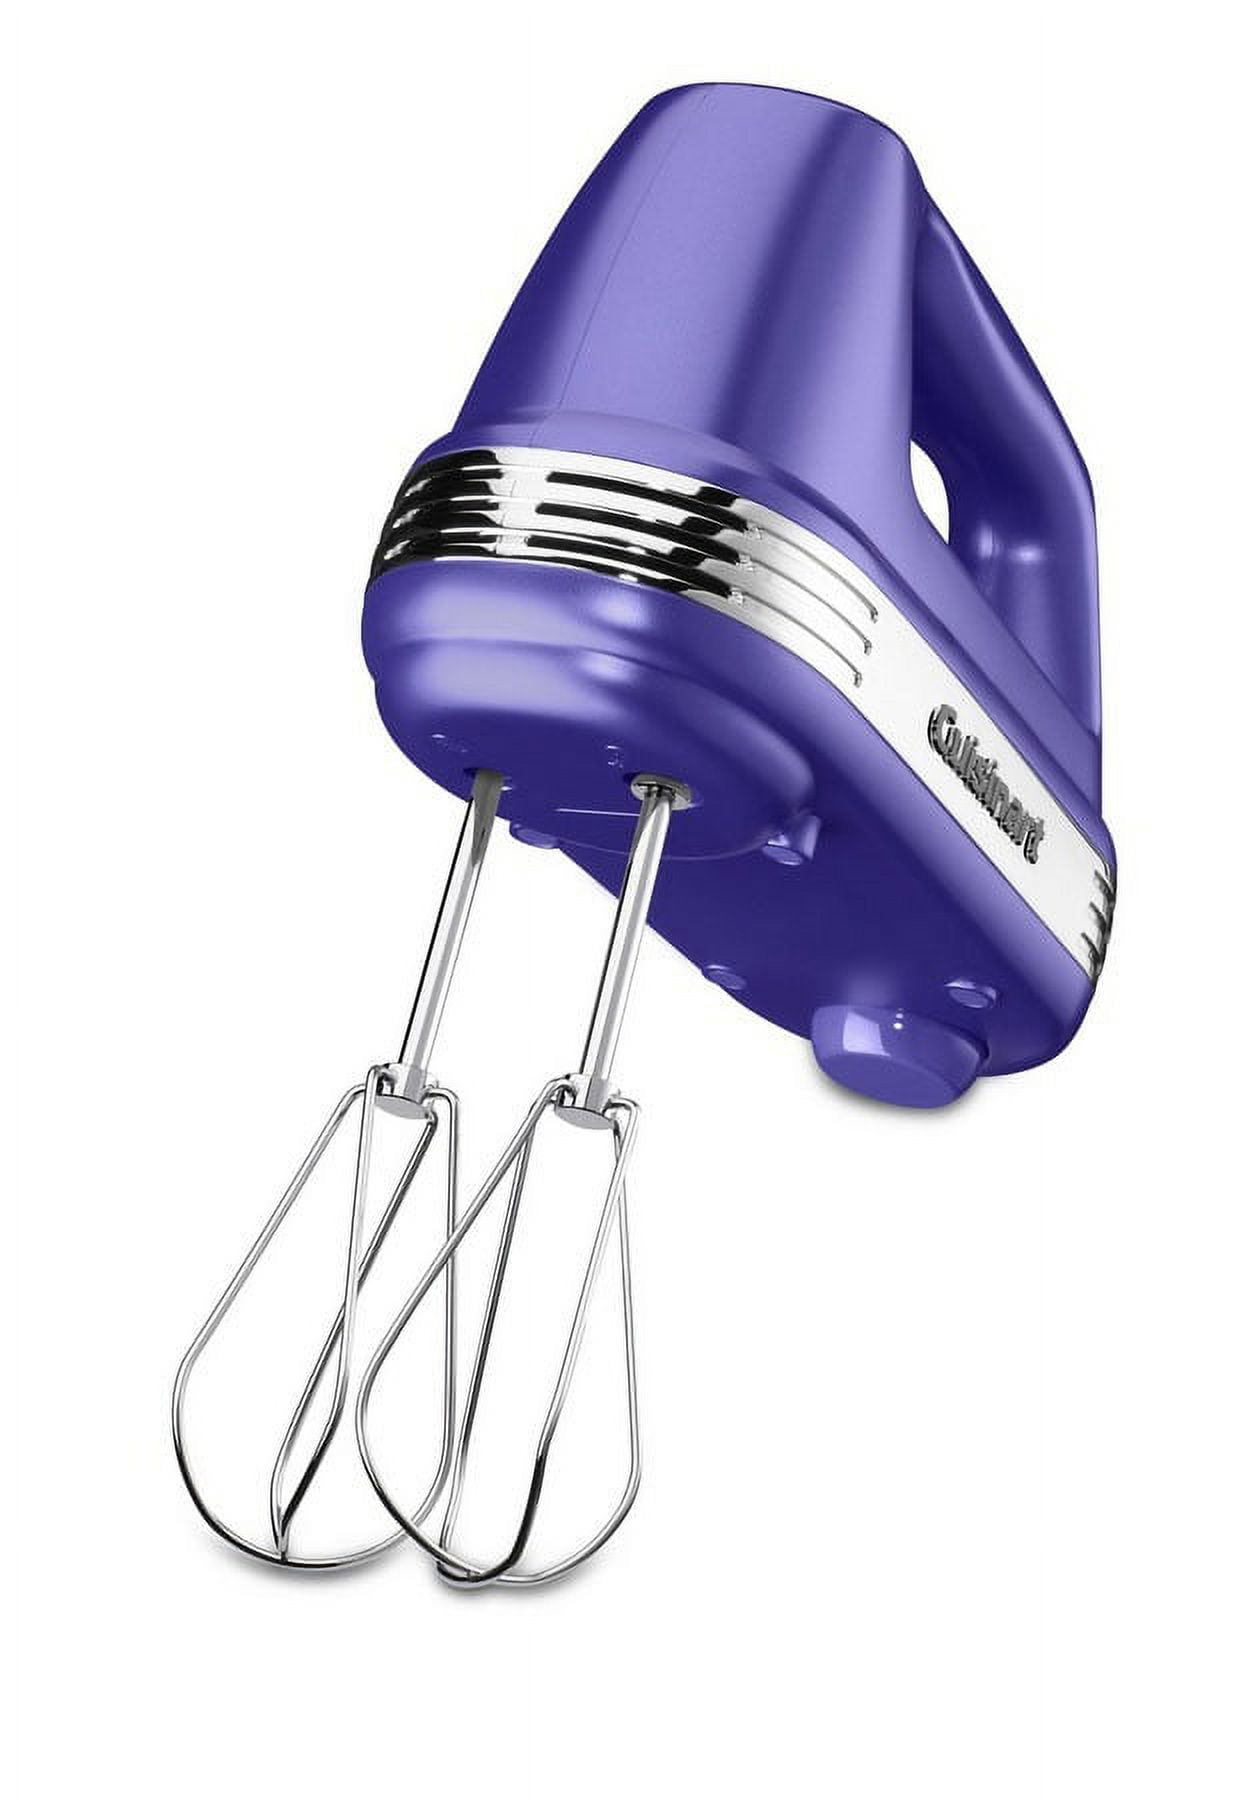 Power Advantage® Deluxe 8-Speed Hand Mixer with Blending Attachment